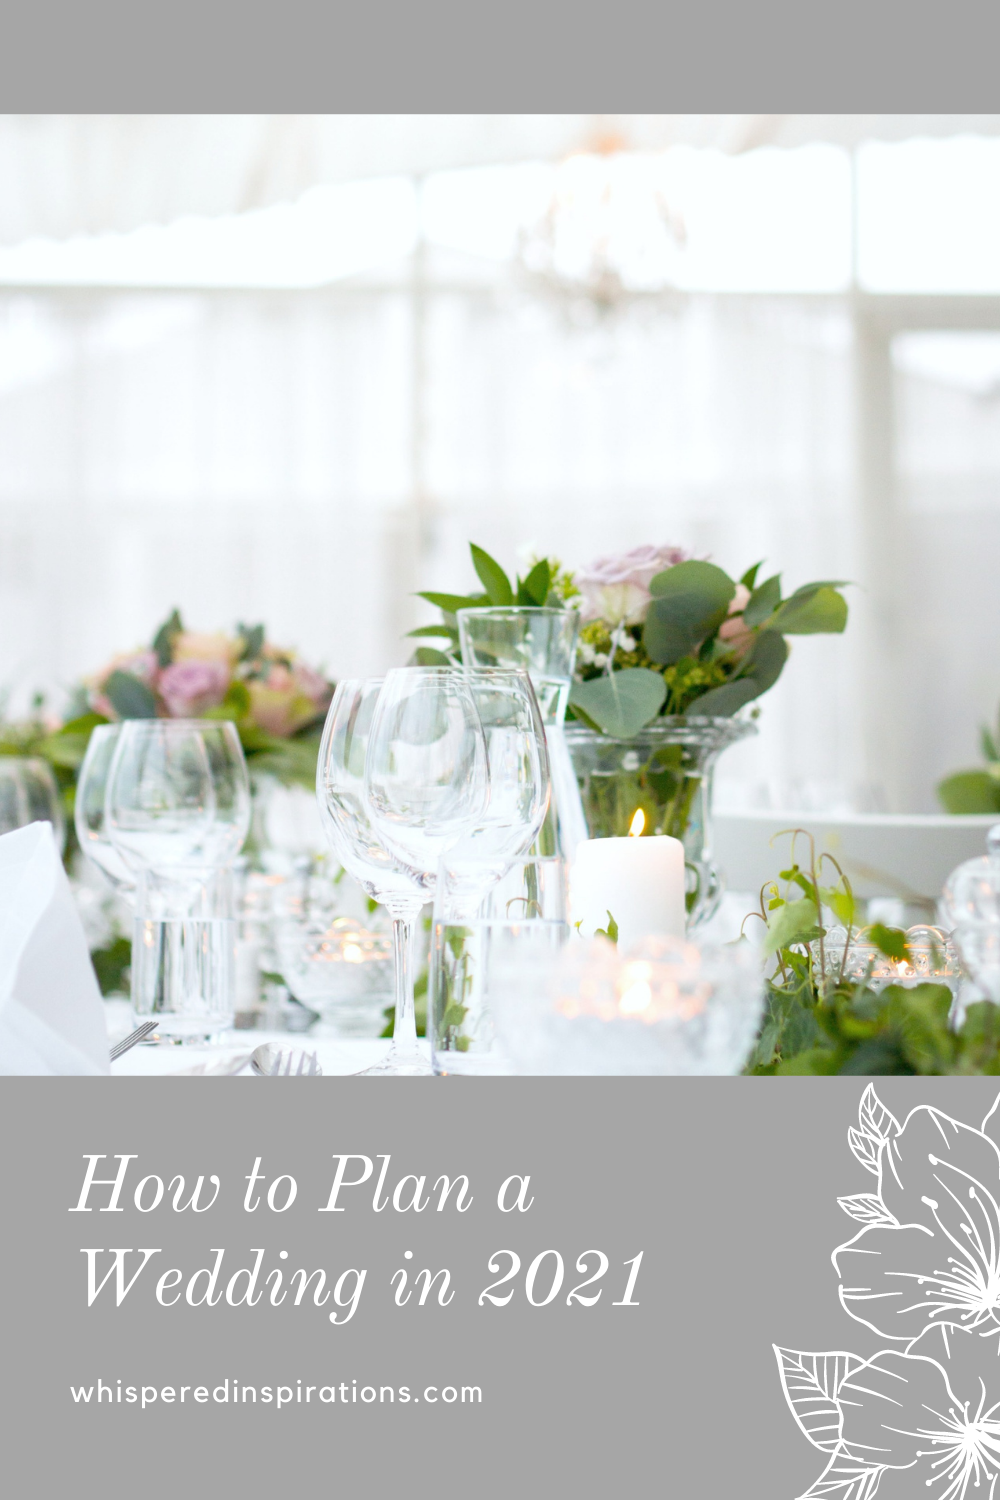 A table decorated and set for a wedding. A banner reads, "How to Plan a Wedding in 2020."